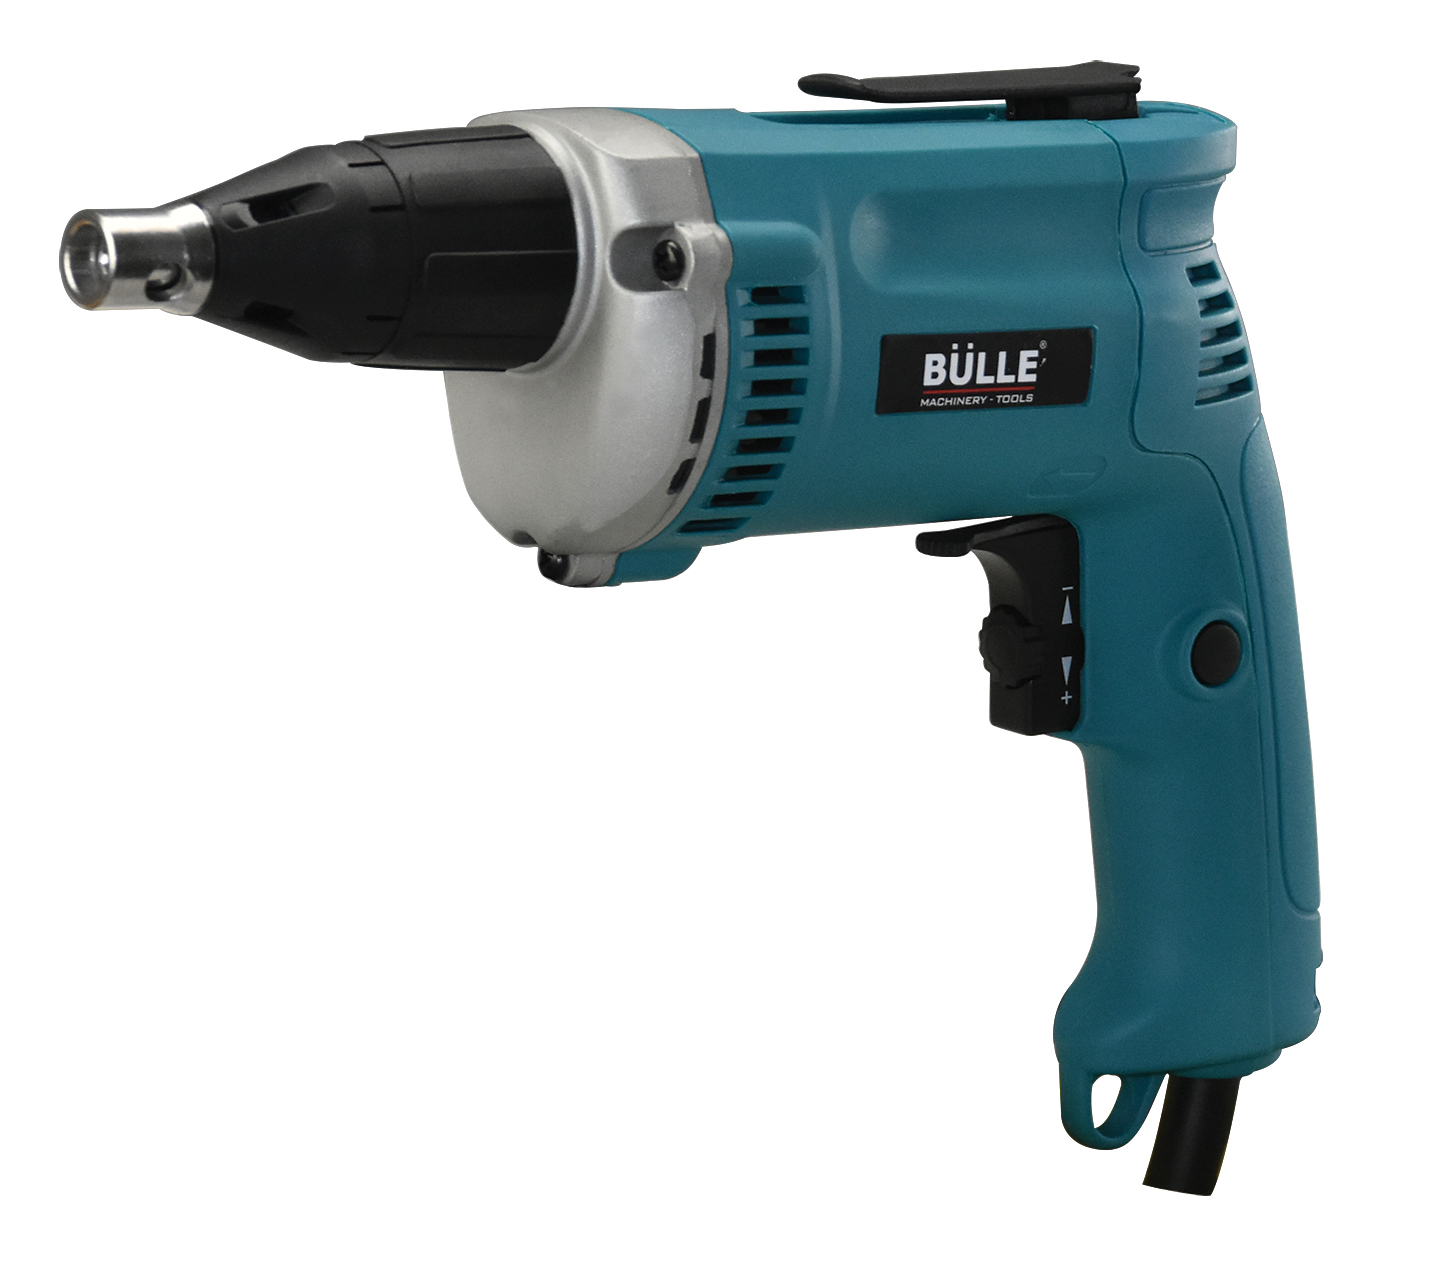 Electric Drywall Screwdriver 600W Bulle